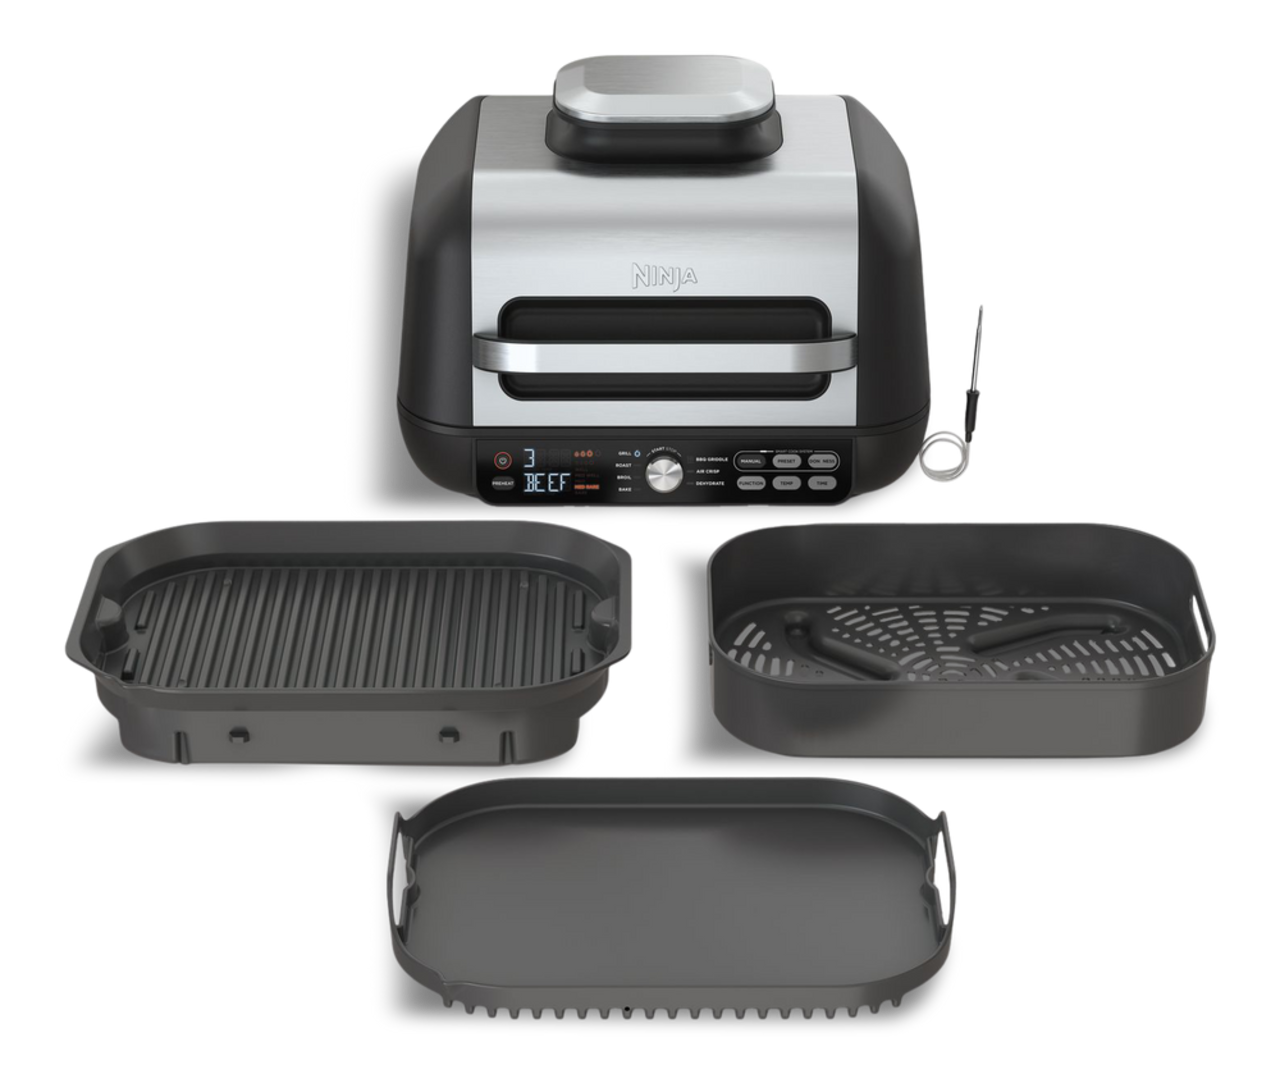 Restored Ninja Ig651 Foodi Smart XL Pro 7in1 Indoor Grill/Griddle Combo, with Griddle, Air Fry, Dehydrate & More, Pro Power Grate, Flat Top Griddle